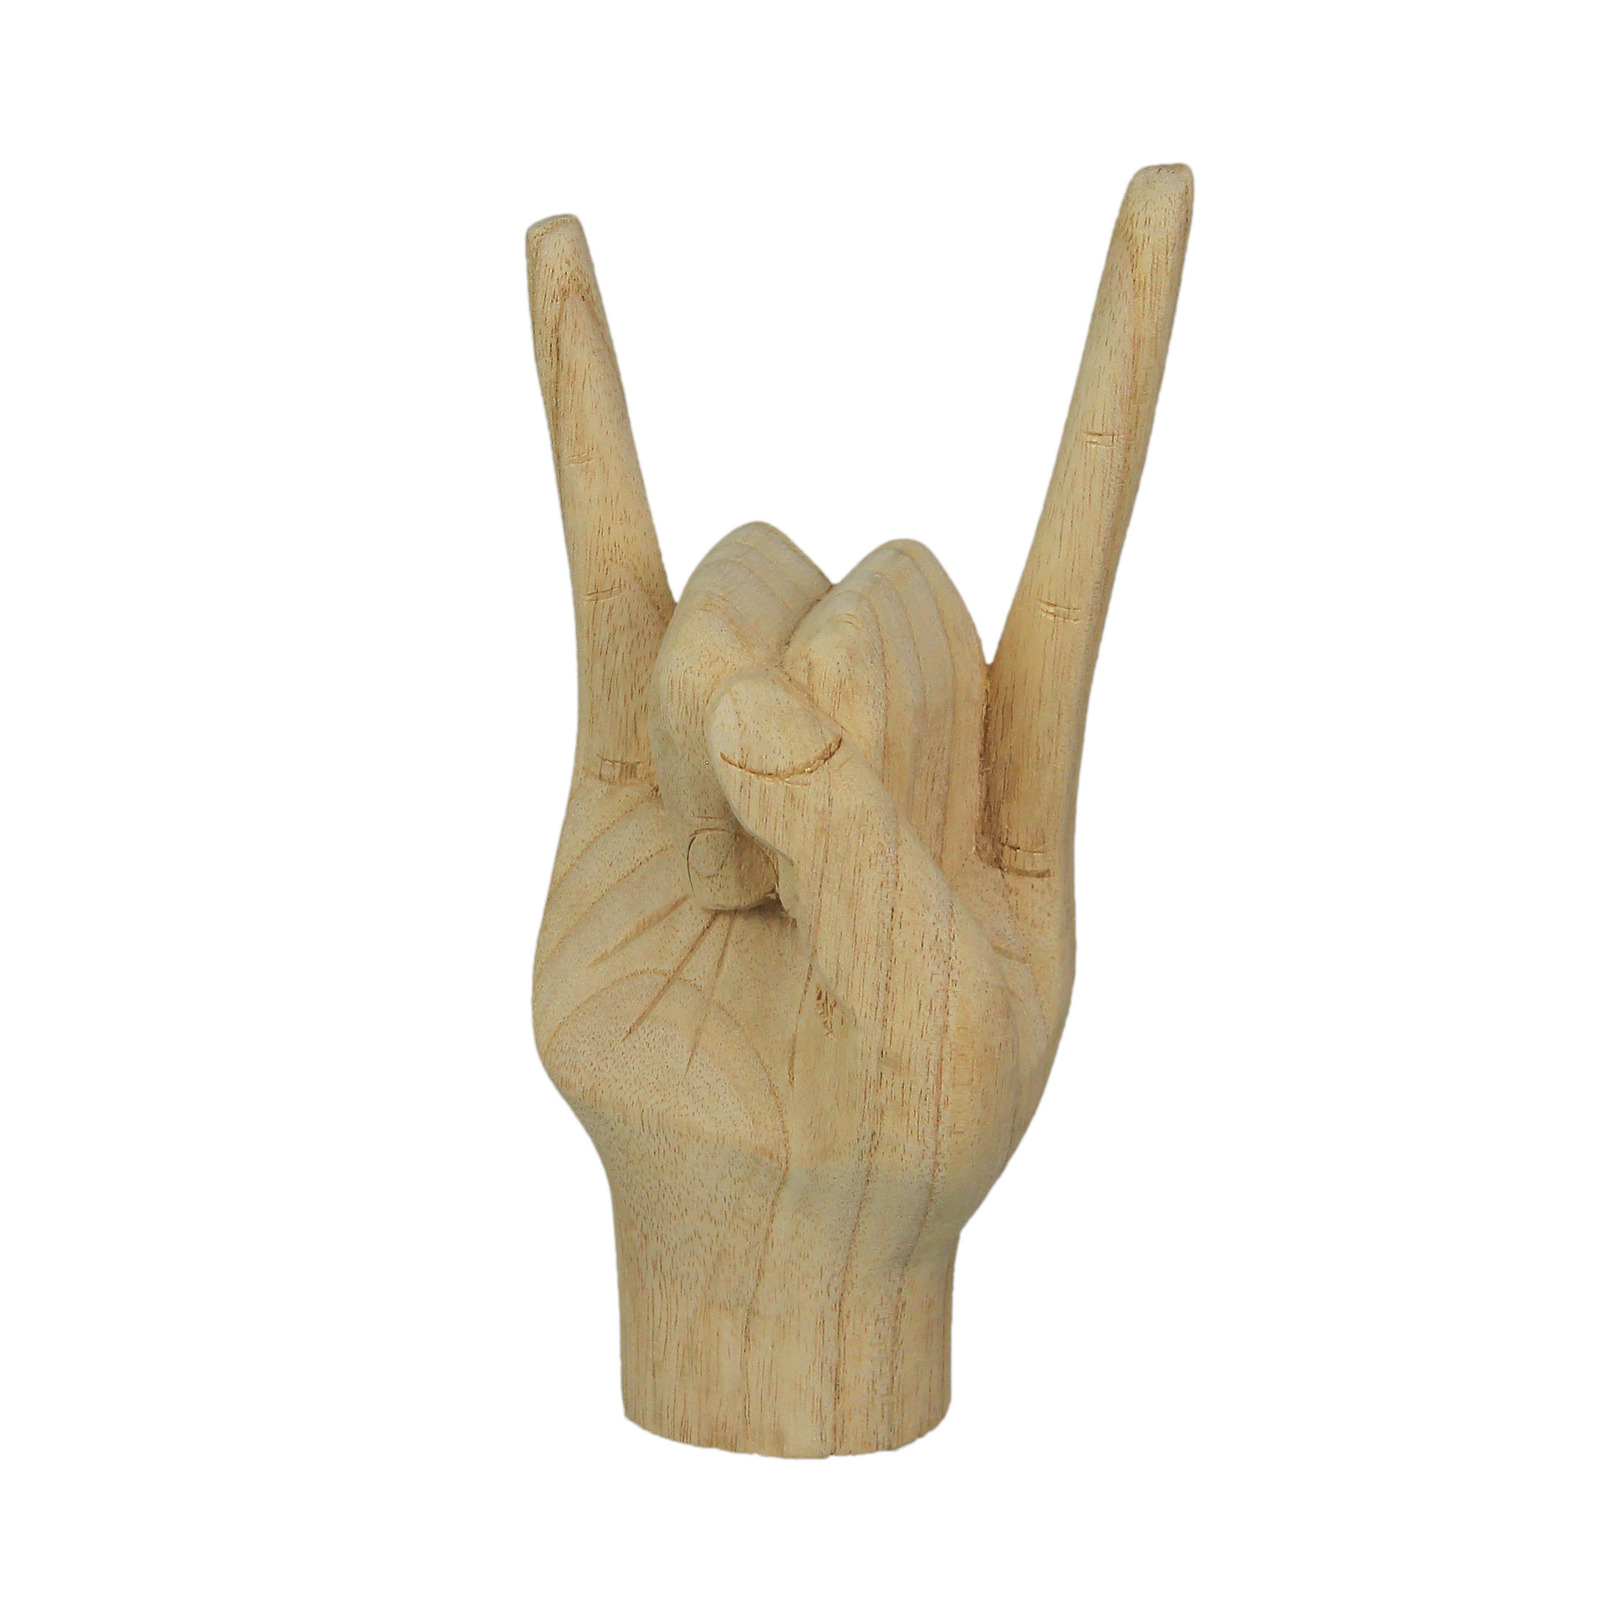 Primary image for Carved Wooden Rock On Devil Horns Hand Gesture Statue Natural Finish Home Decor